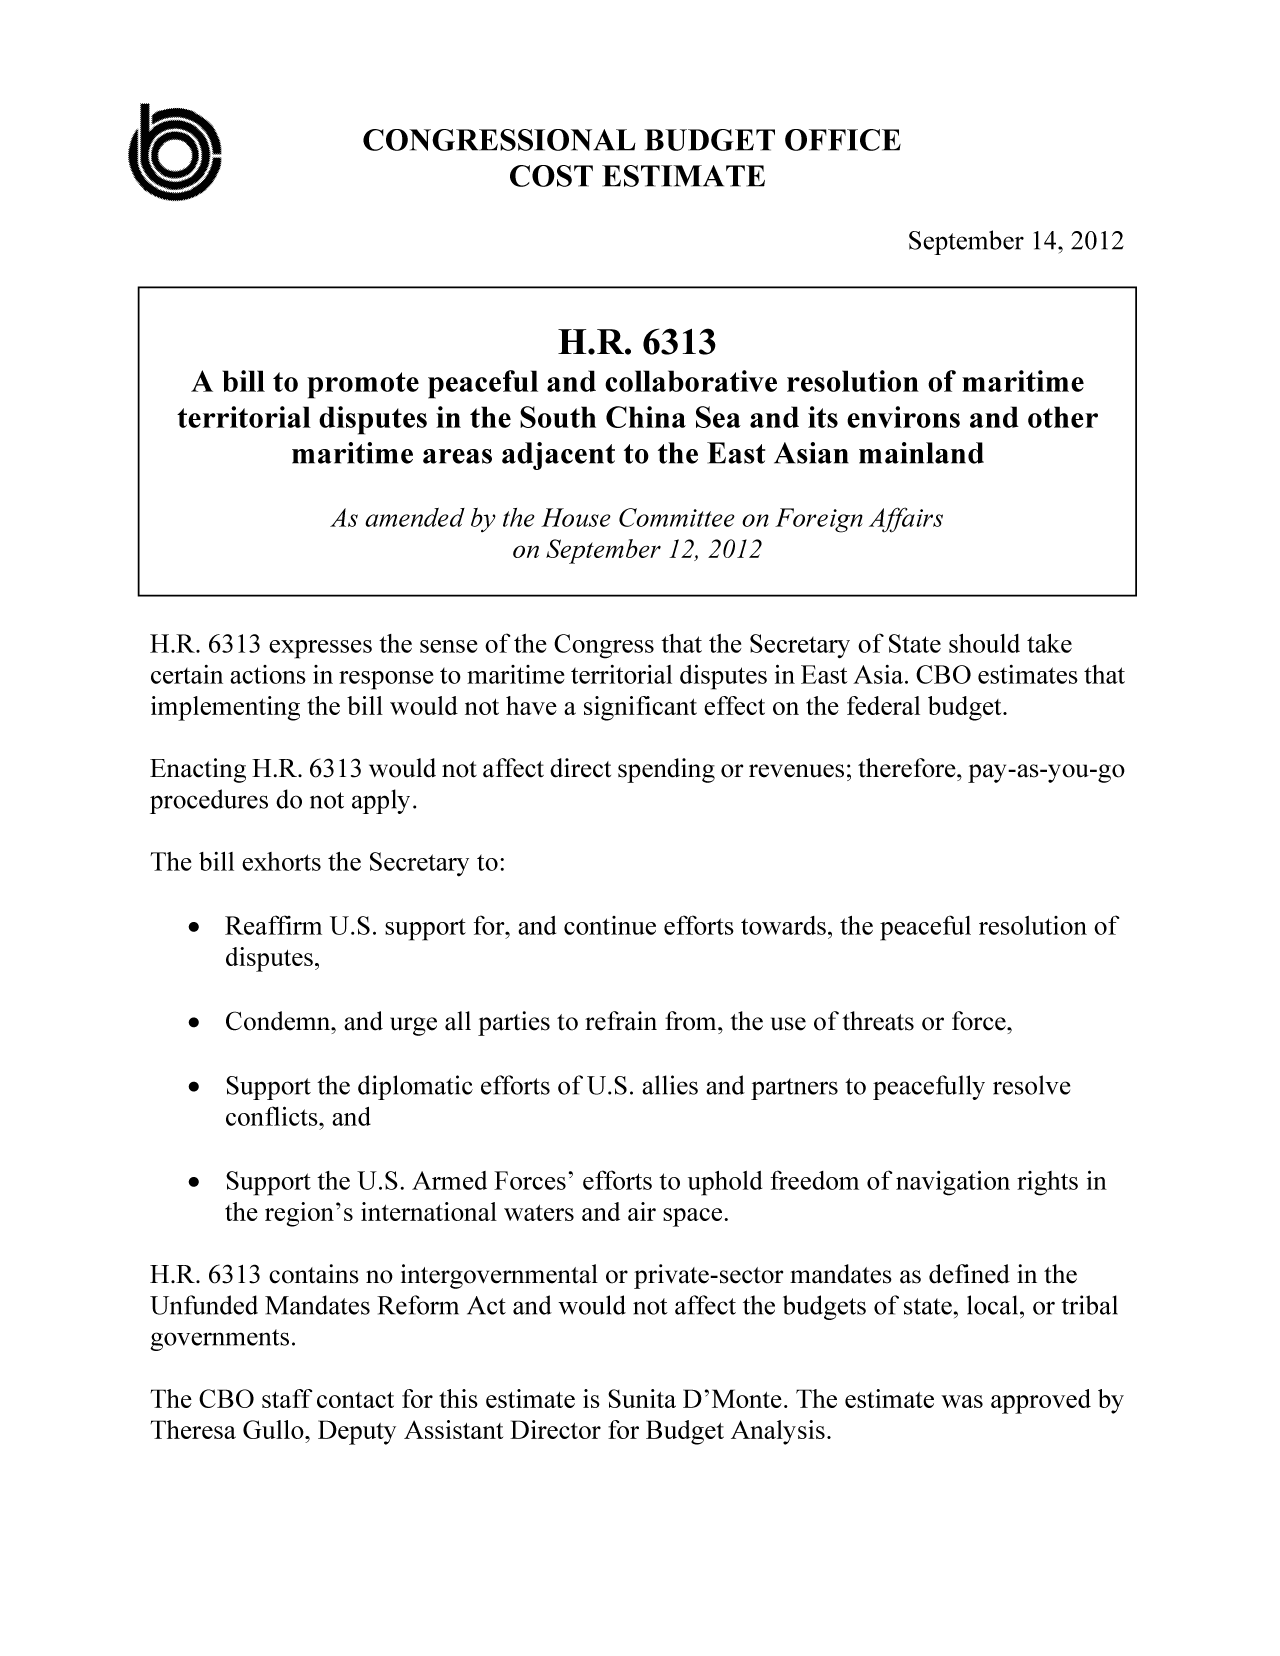 handle is hein.congrec/cbo10899 and id is 1 raw text is: CONGRESSIONAL BUDGET OFFICE
COST ESTIMATE

September 14, 2012

H.R. 6313
A bill to promote peaceful and collaborative resolution of maritime
territorial disputes in the South China Sea and its environs and other
maritime areas adjacent to the East Asian mainland
As amended by the House Committee on Foreign Affairs
on September 12, 2012
H.R. 6313 expresses the sense of the Congress that the Secretary of State should take
certain actions in response to maritime territorial disputes in East Asia. CBO estimates that
implementing the bill would not have a significant effect on the federal budget.
Enacting H.R. 6313 would not affect direct spending or revenues; therefore, pay-as-you-go
procedures do not apply.
The bill exhorts the Secretary to:
 Reaffirm U.S. support for, and continue efforts towards, the peaceful resolution of
disputes,
  Condemn, and urge all parties to refrain from, the use of threats or force,
  Support the diplomatic efforts of U.S. allies and partners to peacefully resolve
conflicts, and
  Support the U.S. Armed Forces' efforts to uphold freedom of navigation rights in
the region's international waters and air space.
H.R. 6313 contains no intergovernmental or private-sector mandates as defined in the
Unfunded Mandates Reform Act and would not affect the budgets of state, local, or tribal
governments.
The CBO staff contact for this estimate is Sunita D'Monte. The estimate was approved by
Theresa Gullo, Deputy Assistant Director for Budget Analysis.

a


